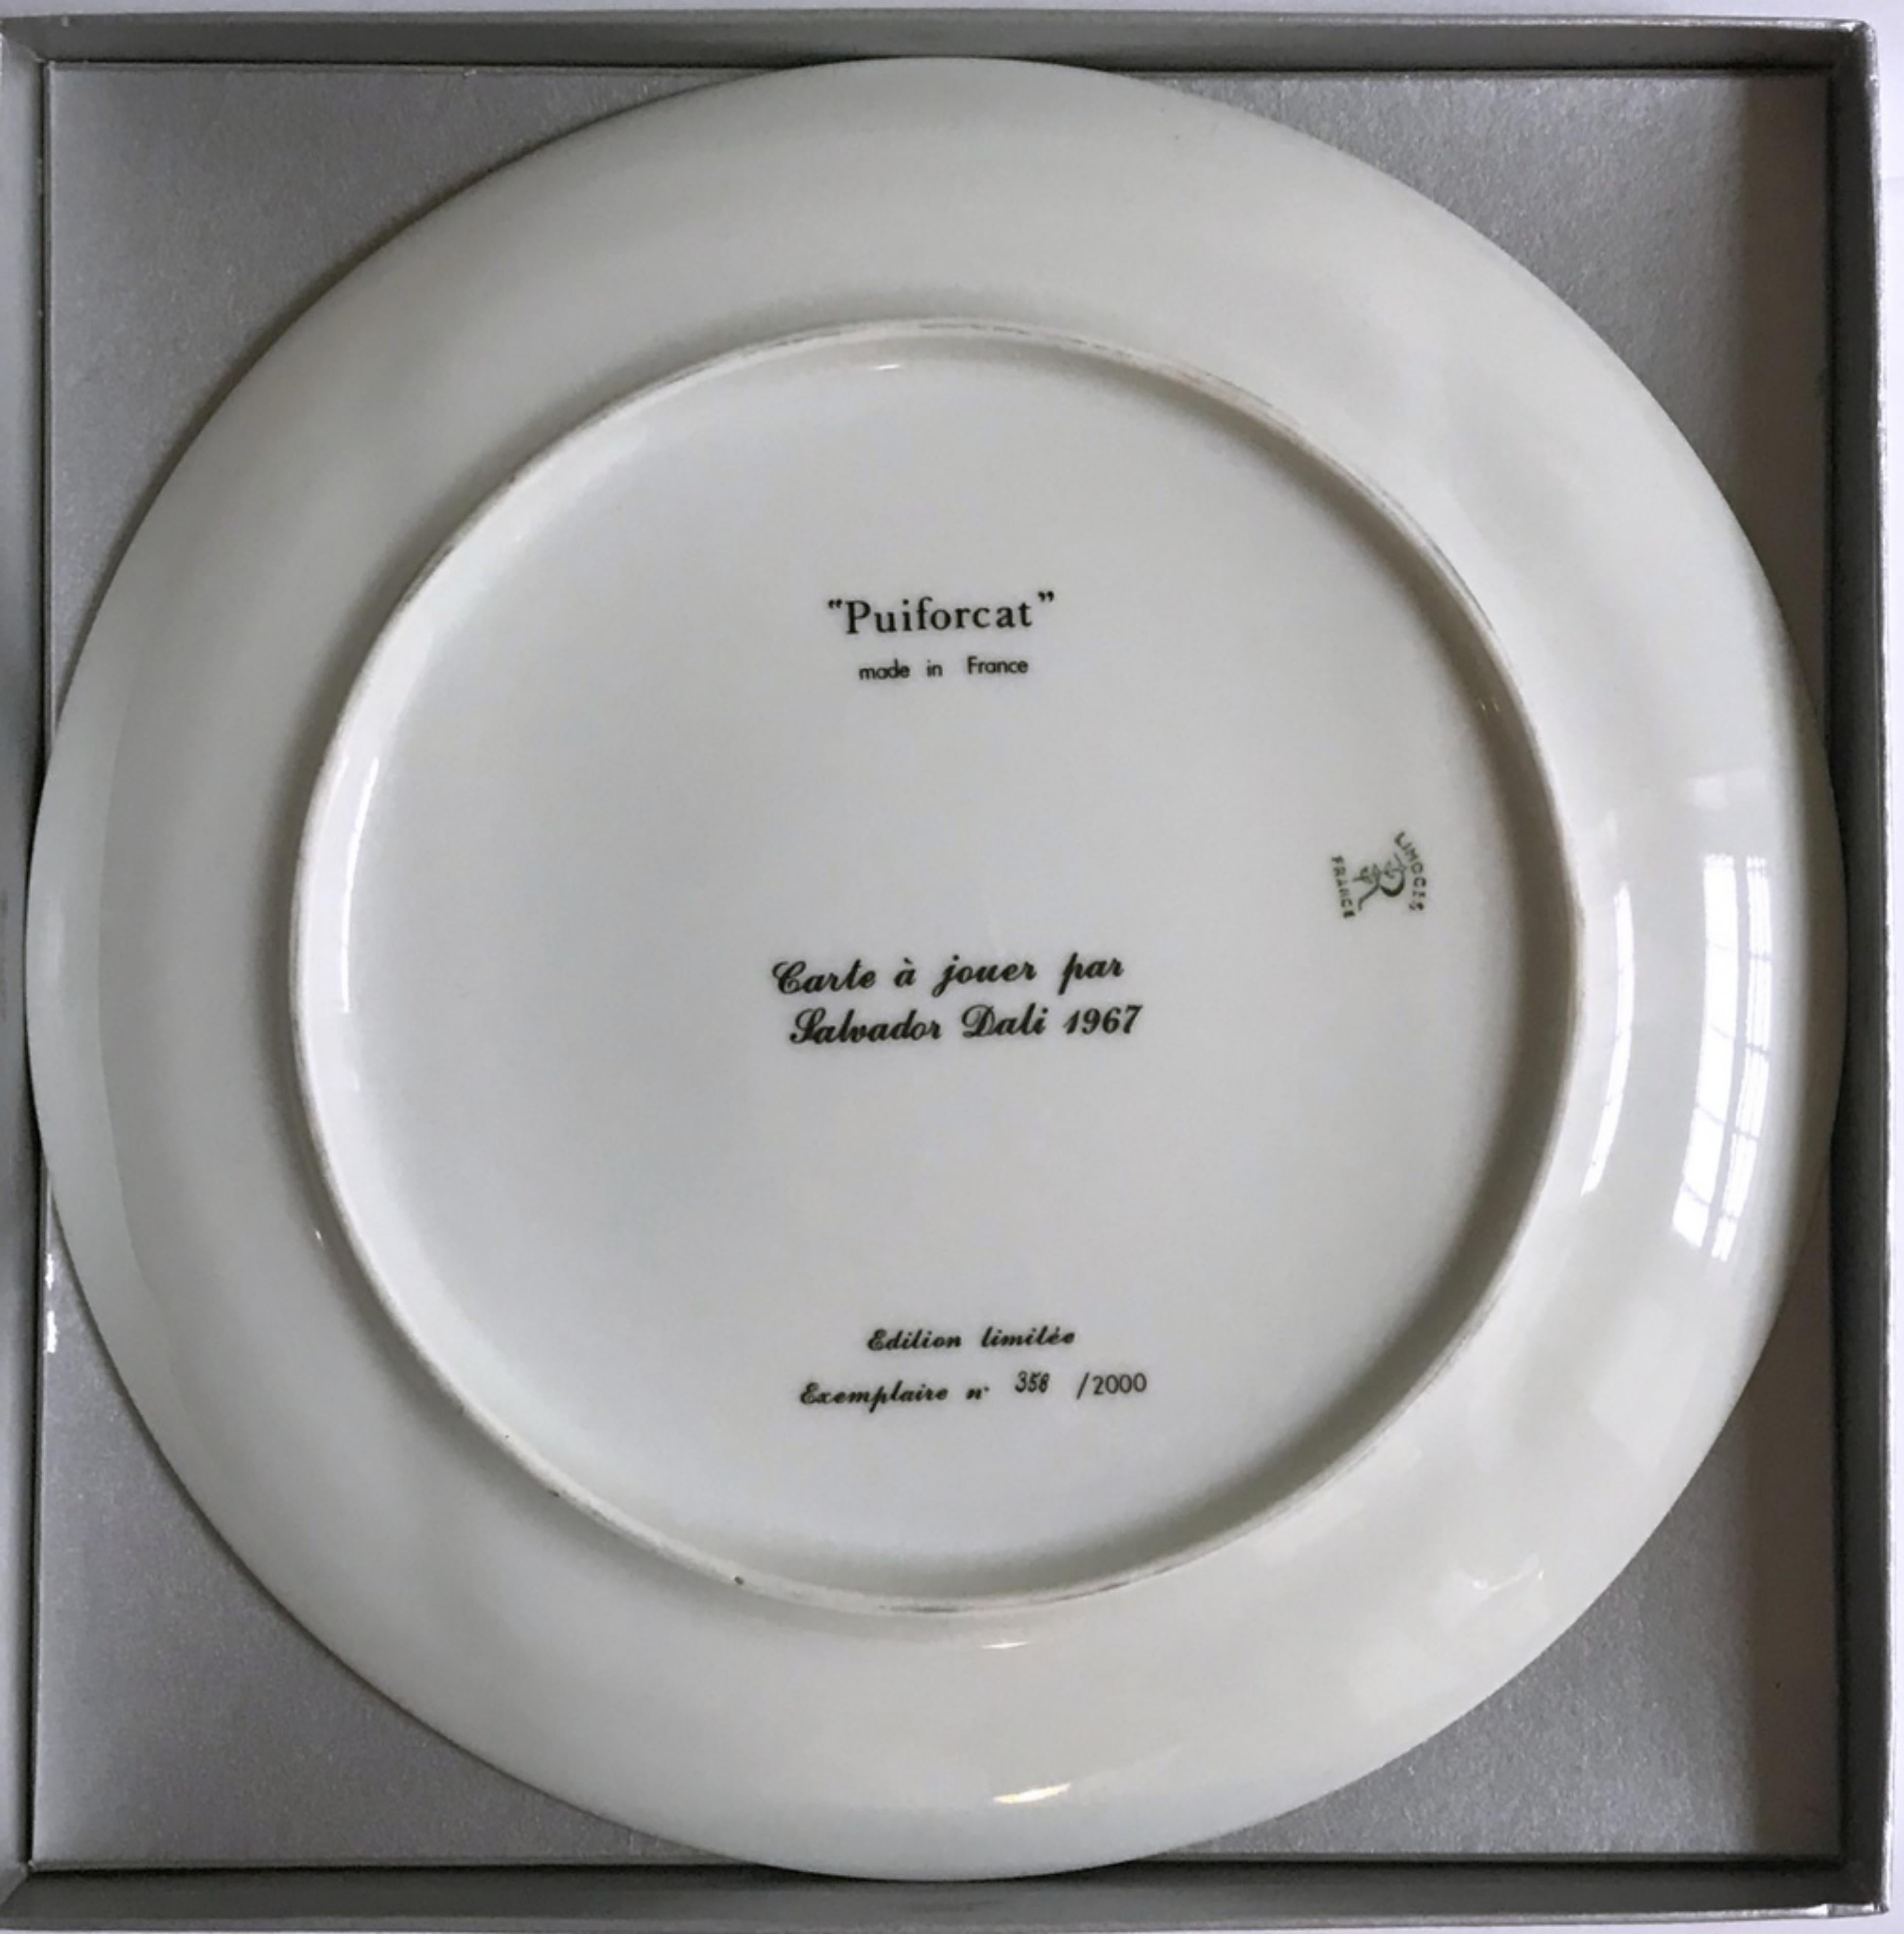 Salvador Dali
Queen of Hearts, 1967
Limited Edition Limoges Porcelain Plate. Signature Fired into Plate. Numbered with COA
9 3/4 inches diameter
Edition 358/2000
Artist Signature and edition Fired into Plate on front. Certificate of Authenticity